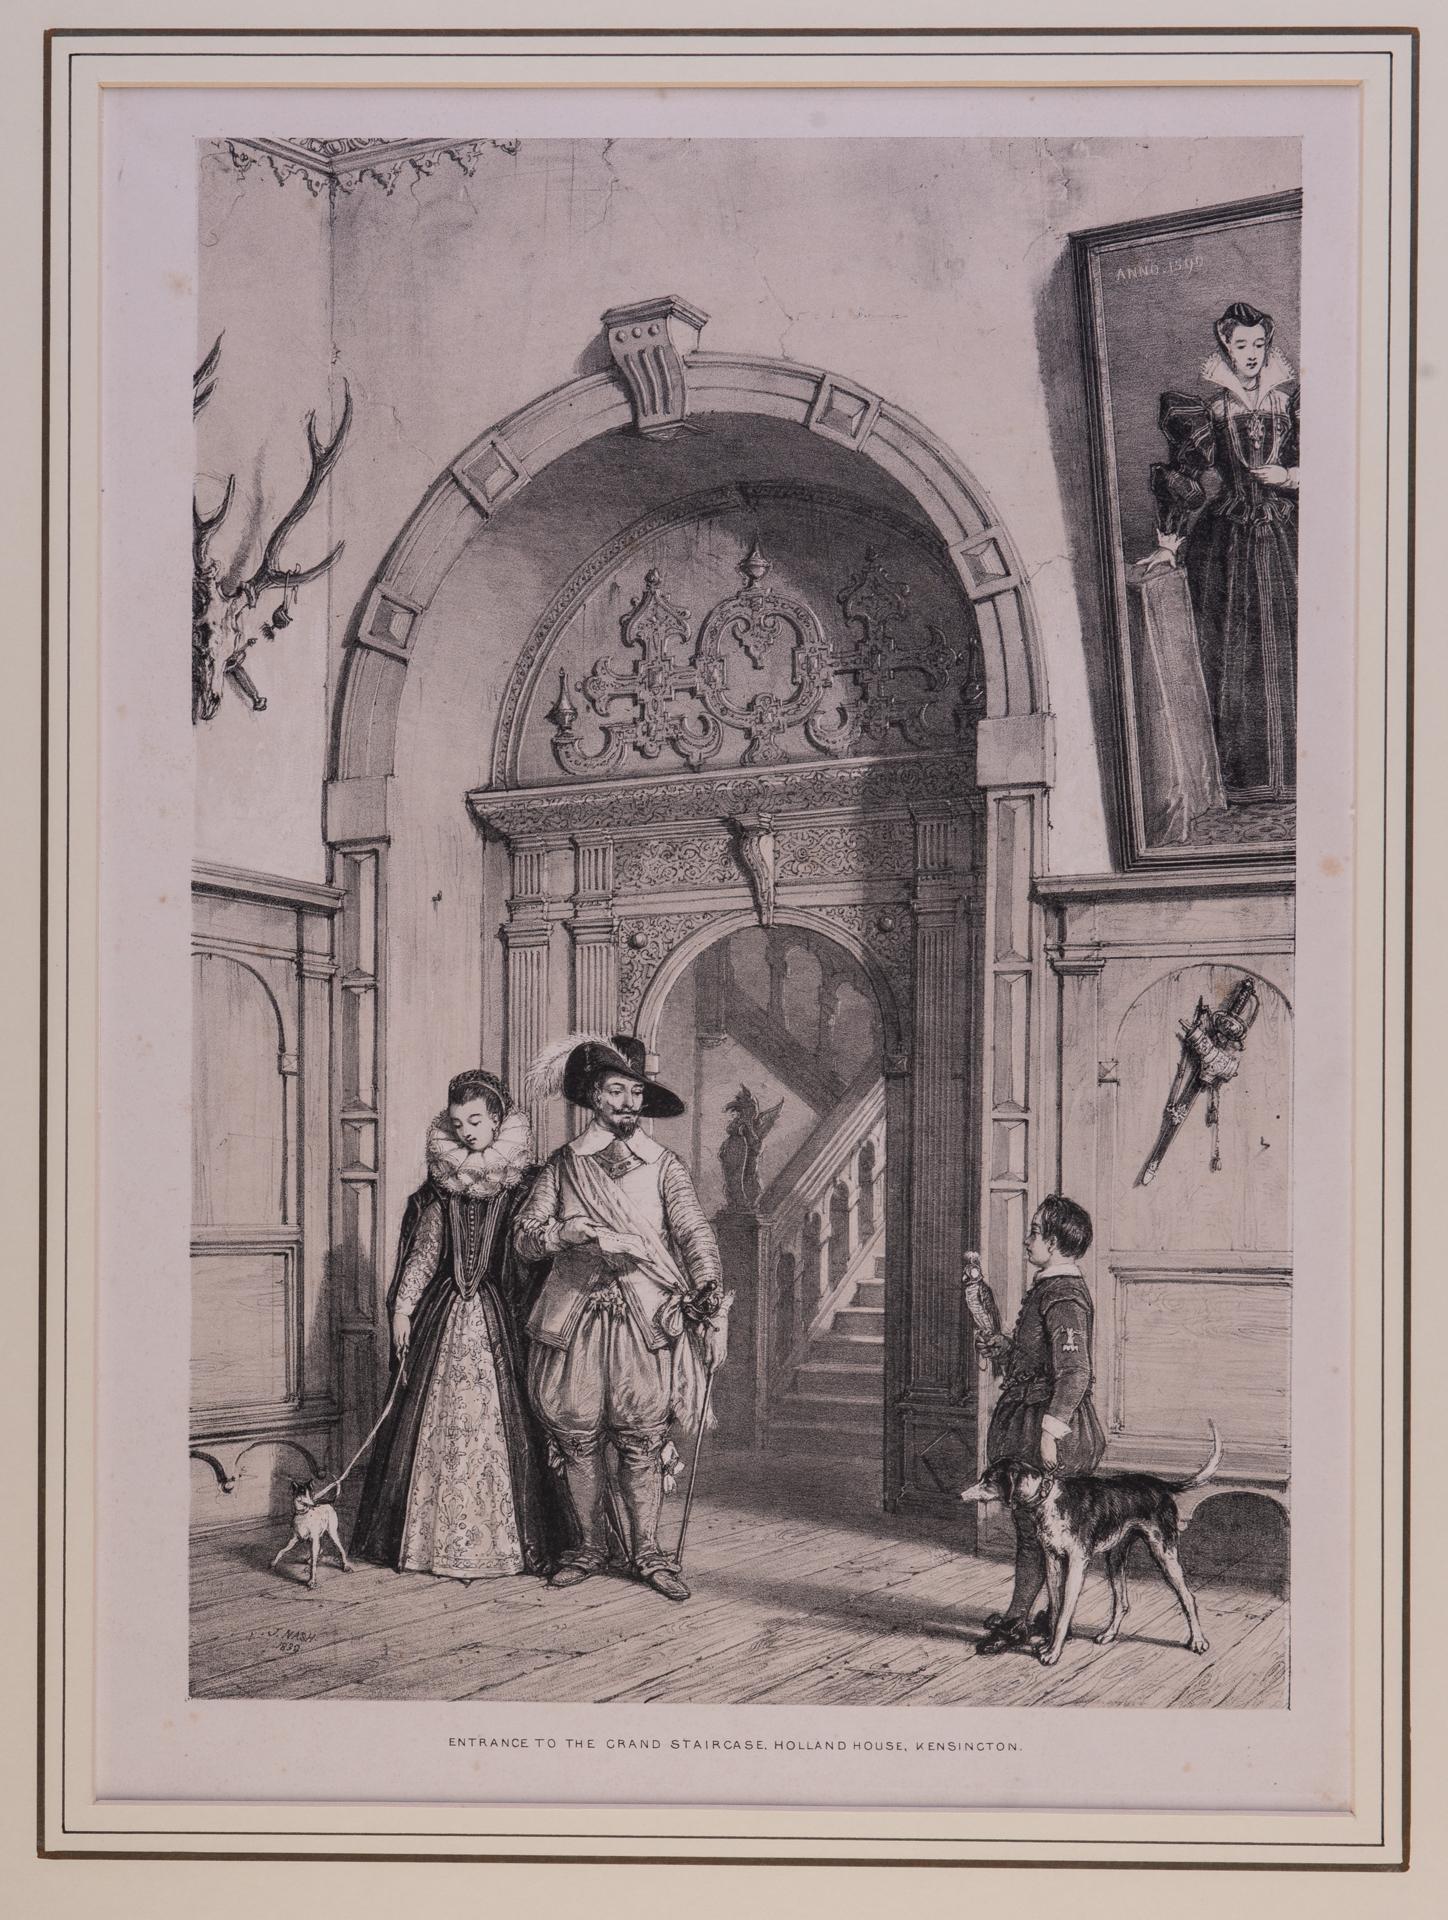 
ST/218 - 3 - Entrance --- Two colors lithography in black and sepia.
Author: Joseph Nash, famous British painter, member of the Gothic Revival Group. In 1838 he published the Revival Lithographic Collection 